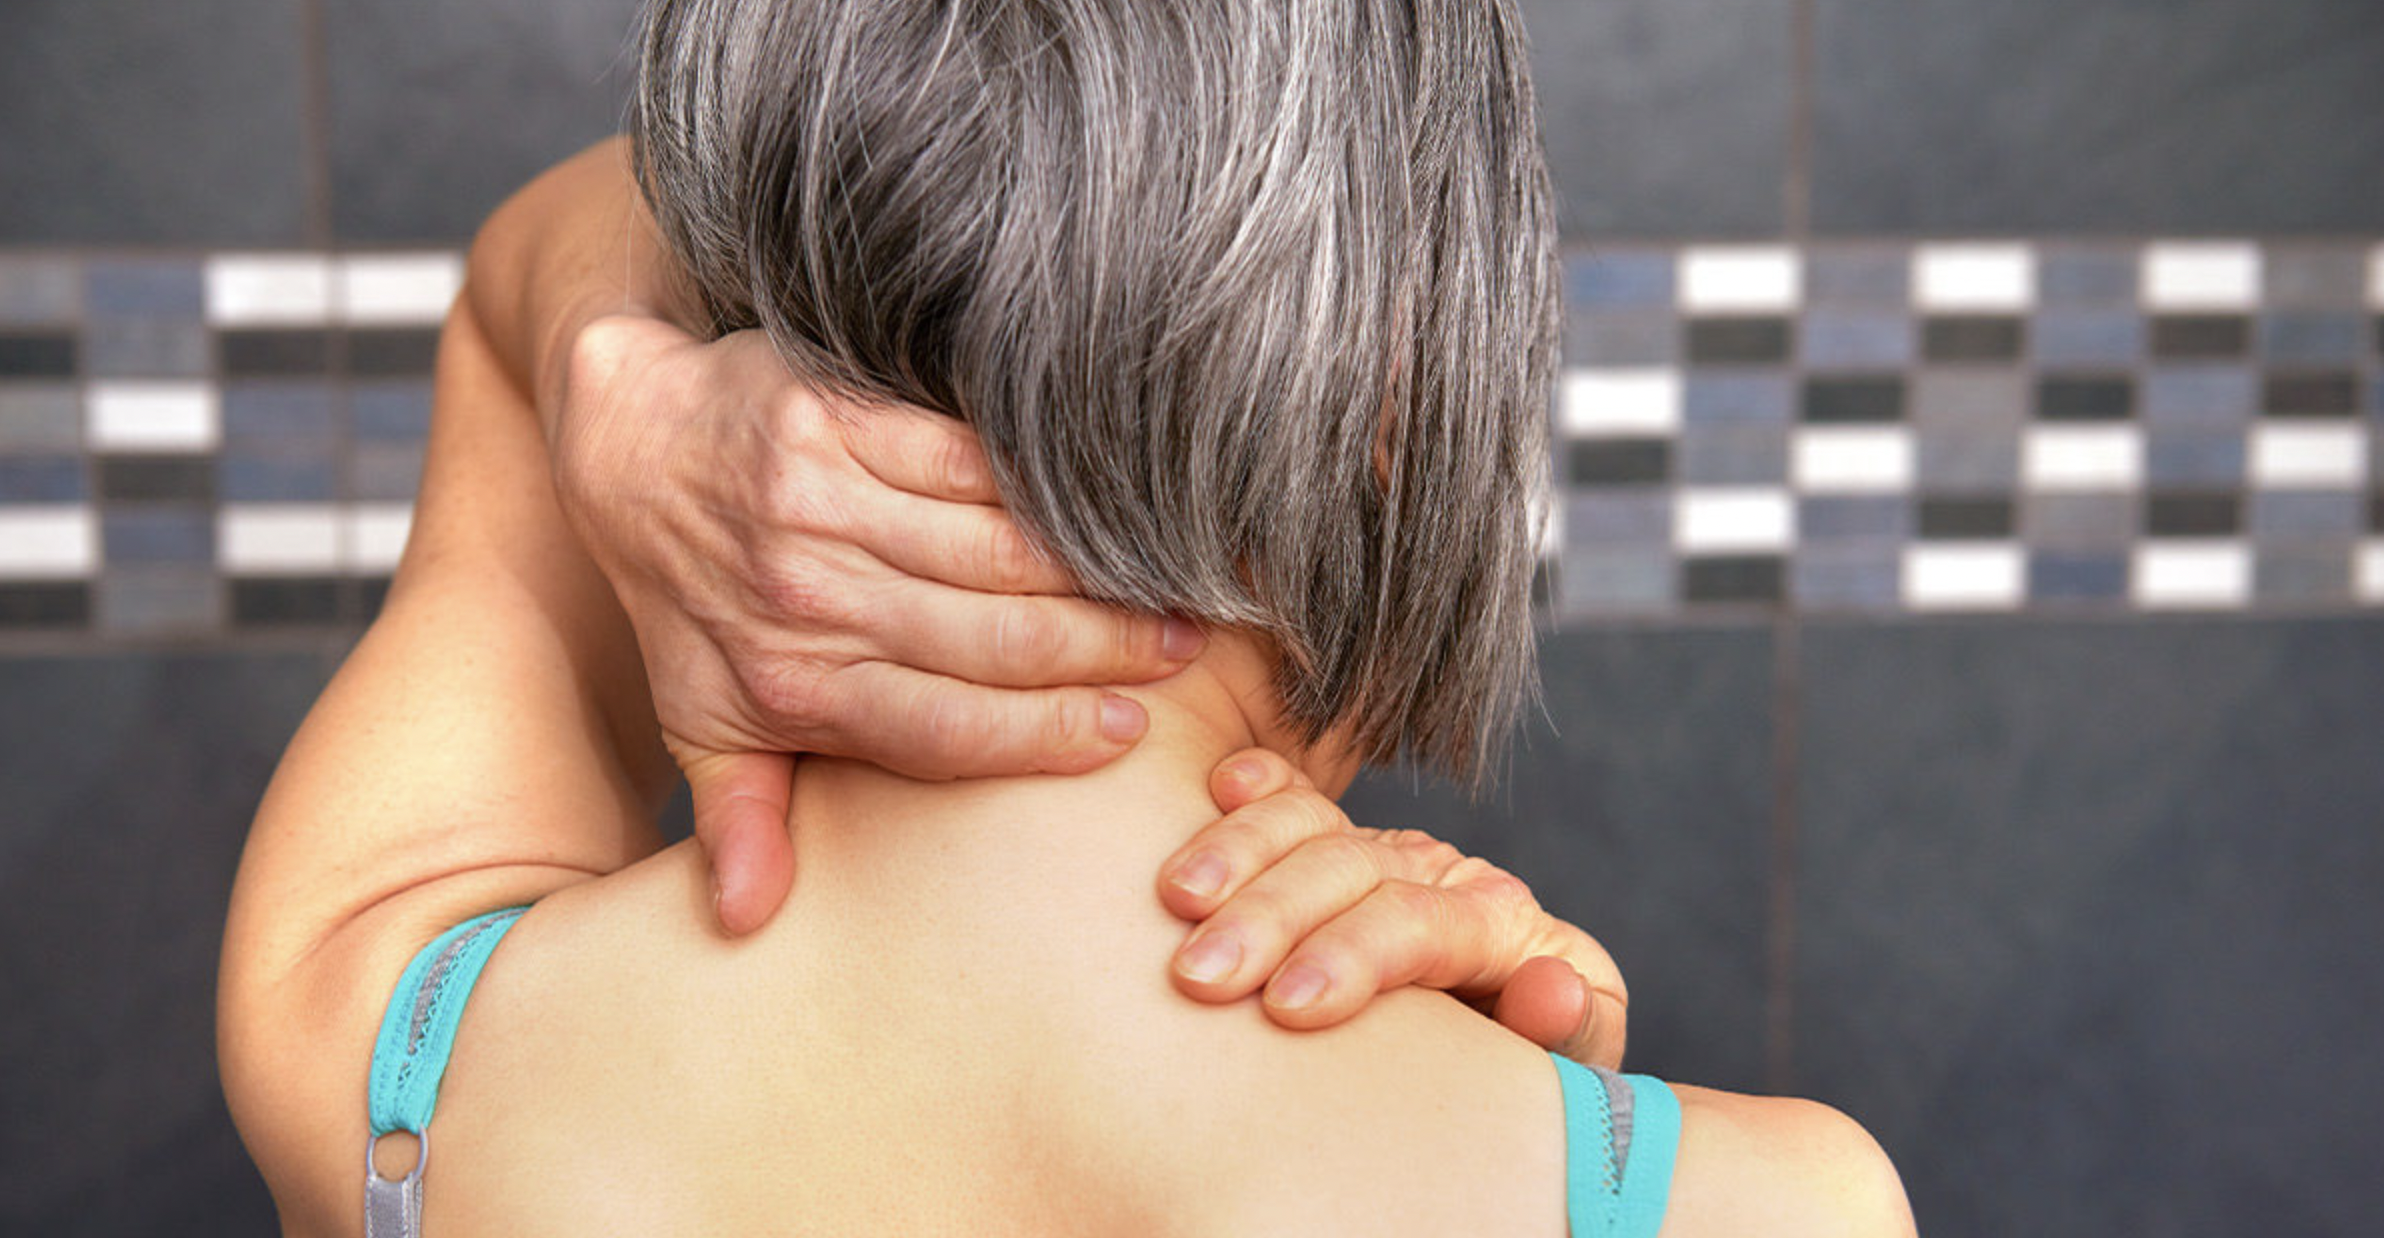 How to give yourself a neck and shoulder massage